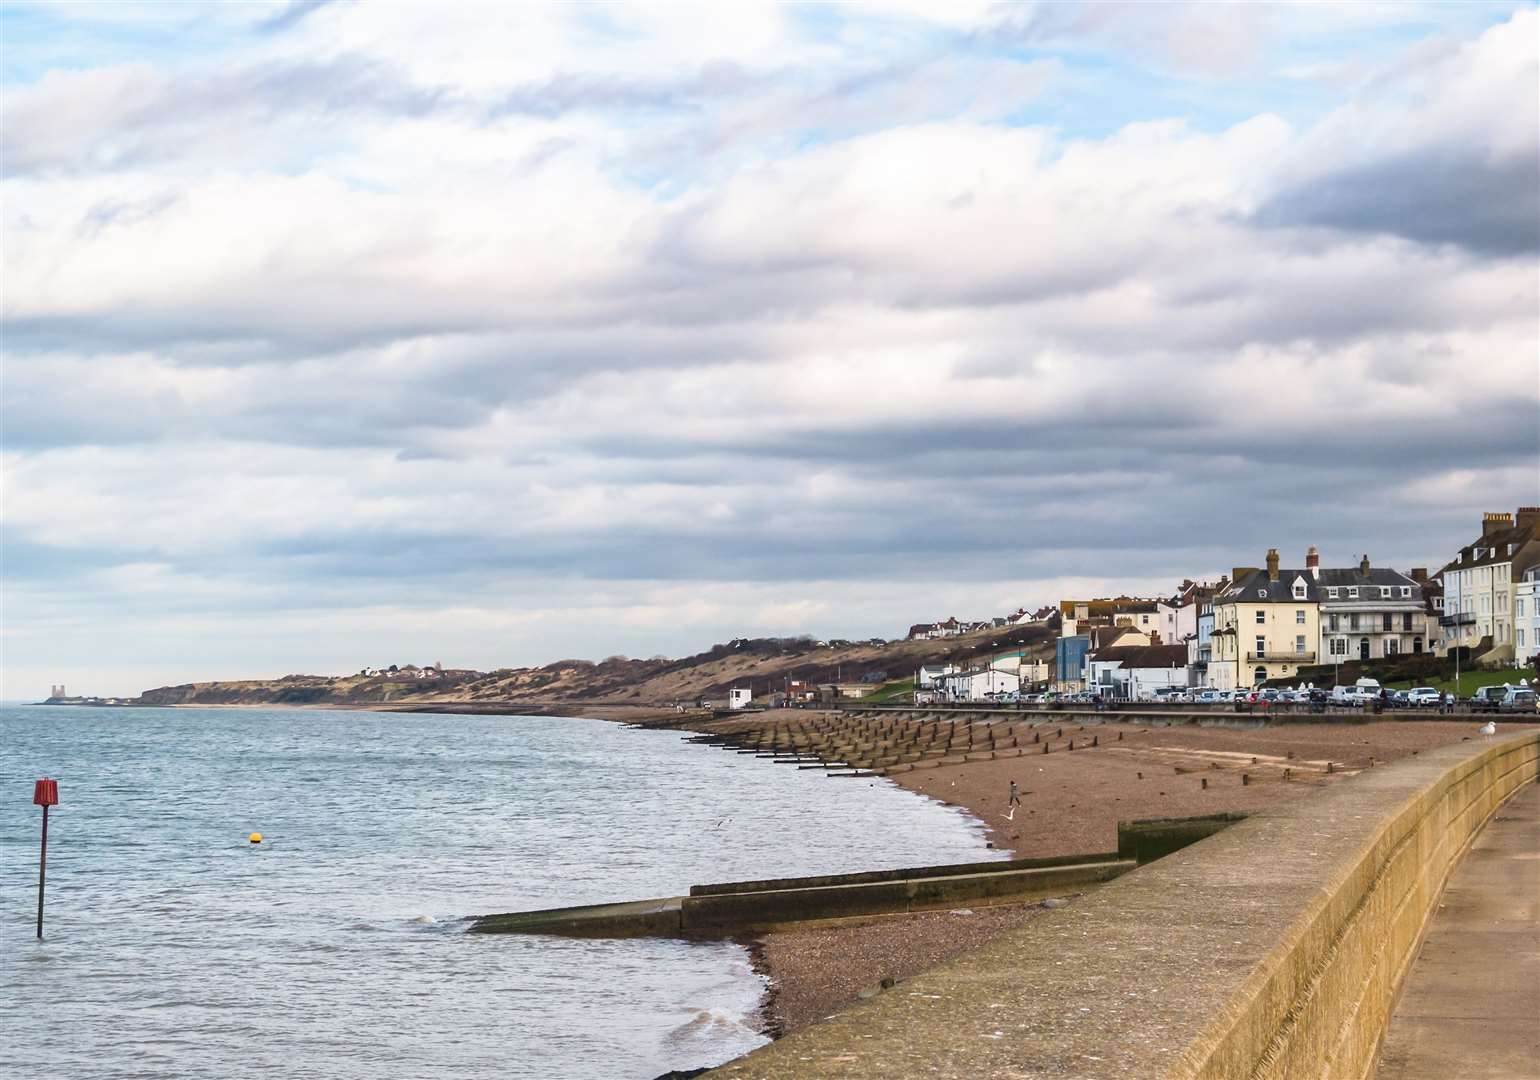 People have been advised against bathing in Herne Bay due to a pollution risk